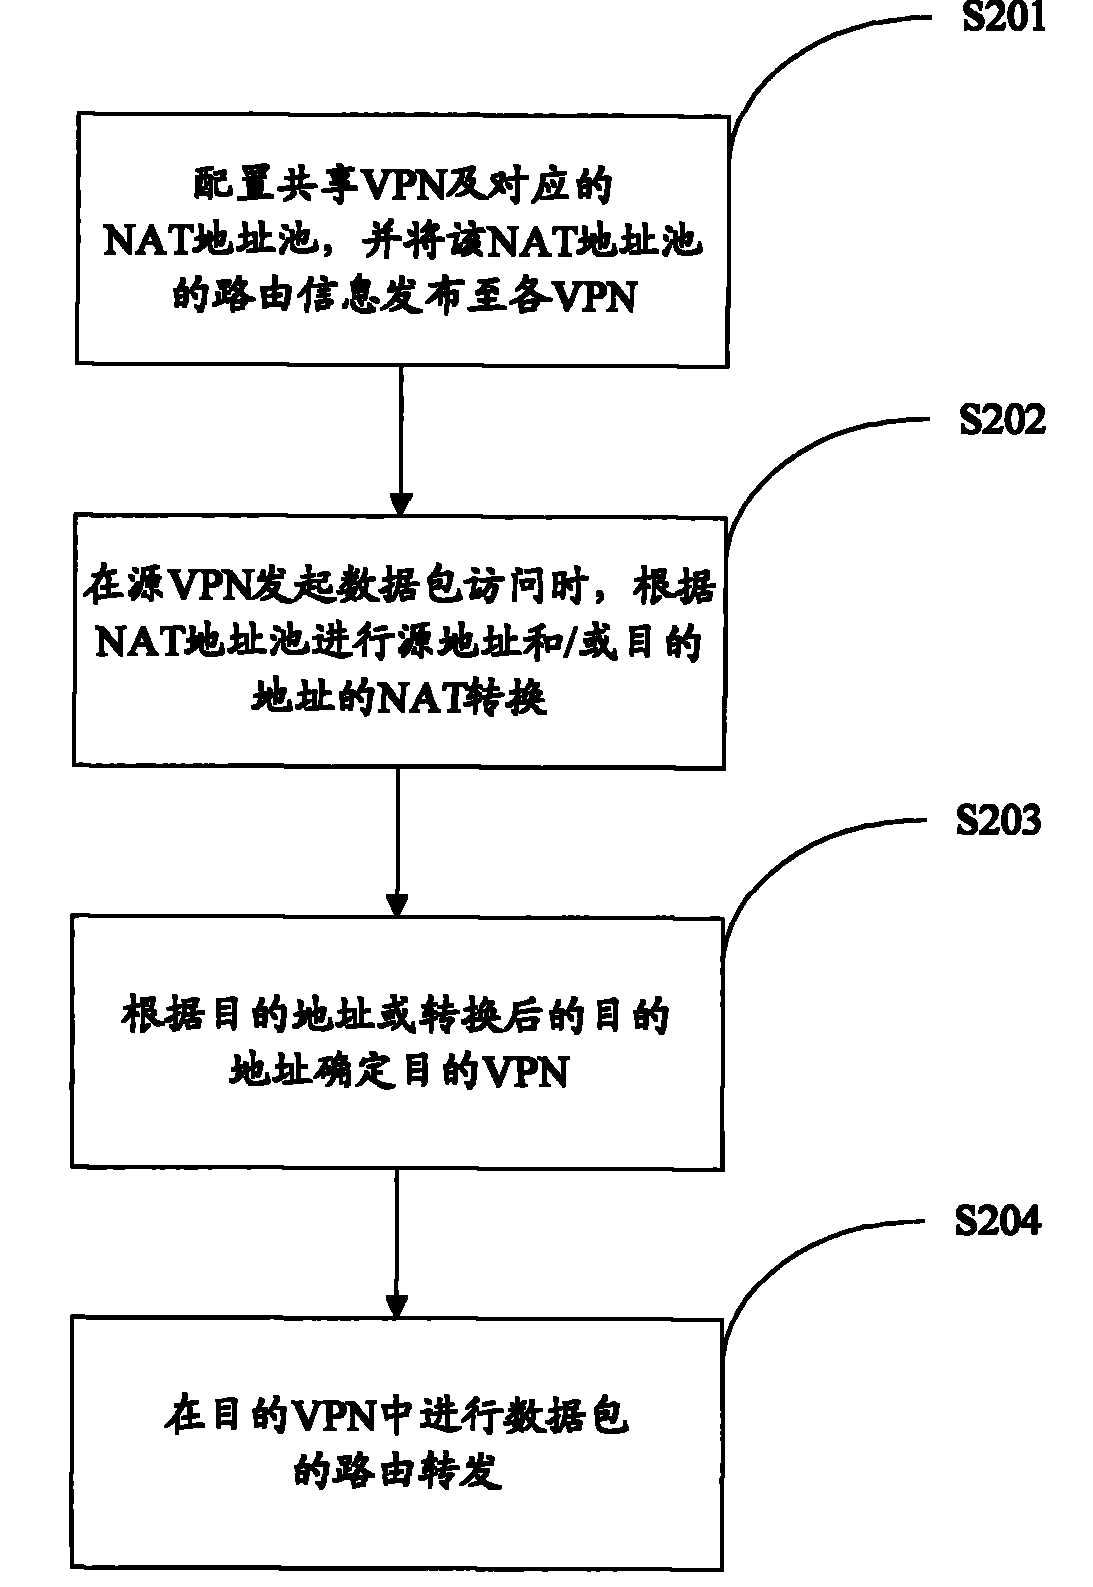 Method and device for implementing inter-access between virtual private networks by conversion of network addresses